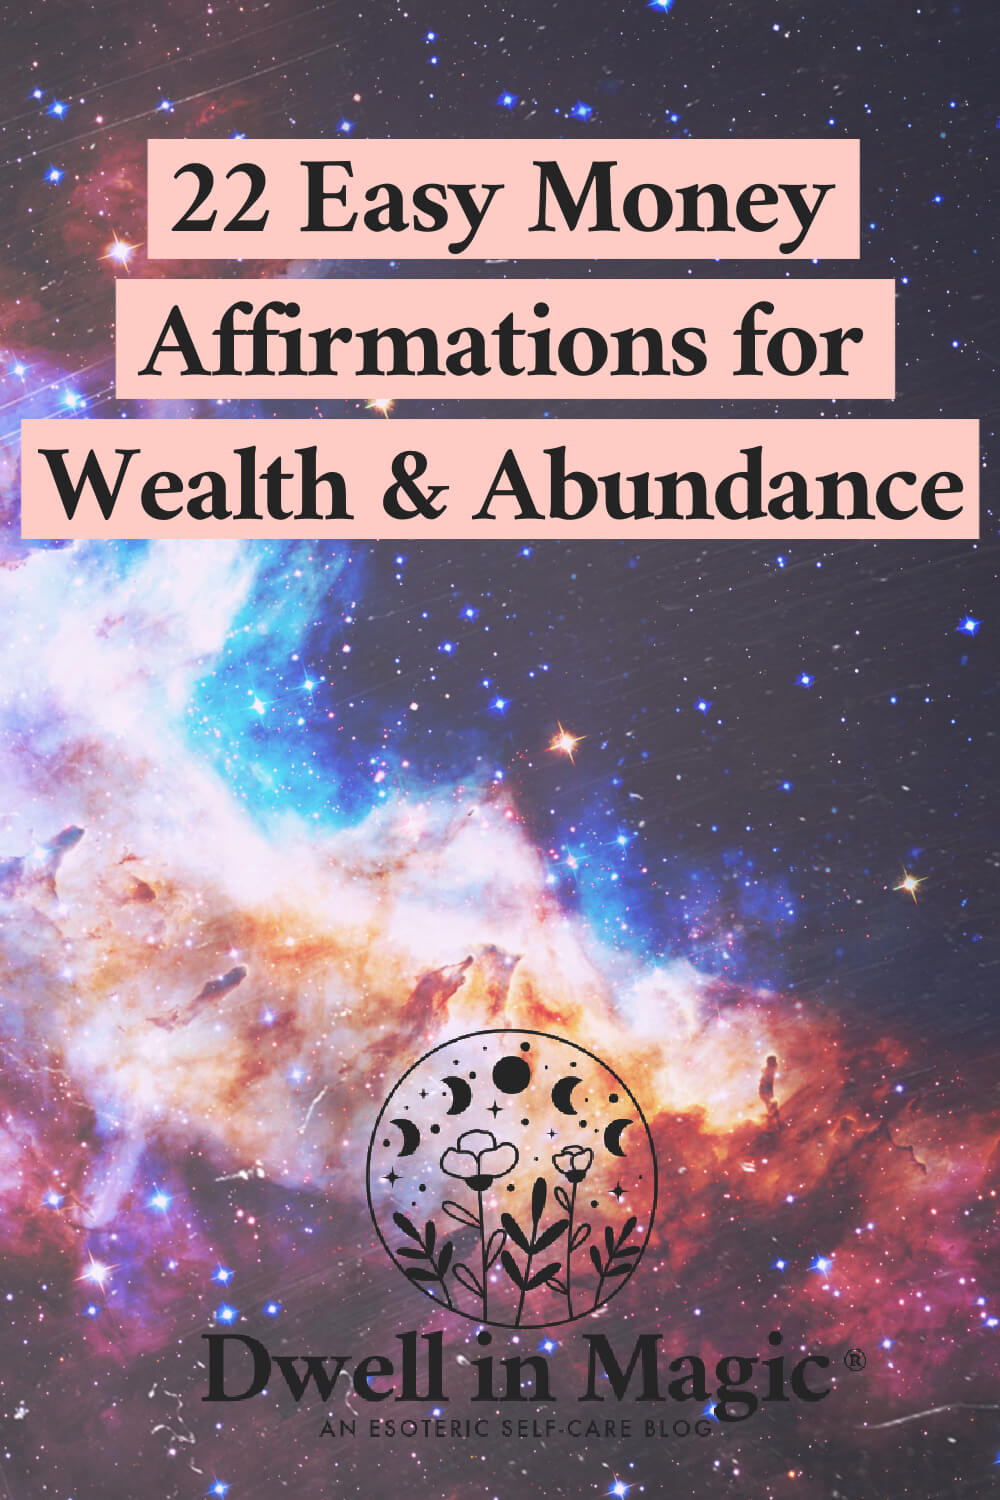 How To Find The Time To Wealth Manifestation On Twitter